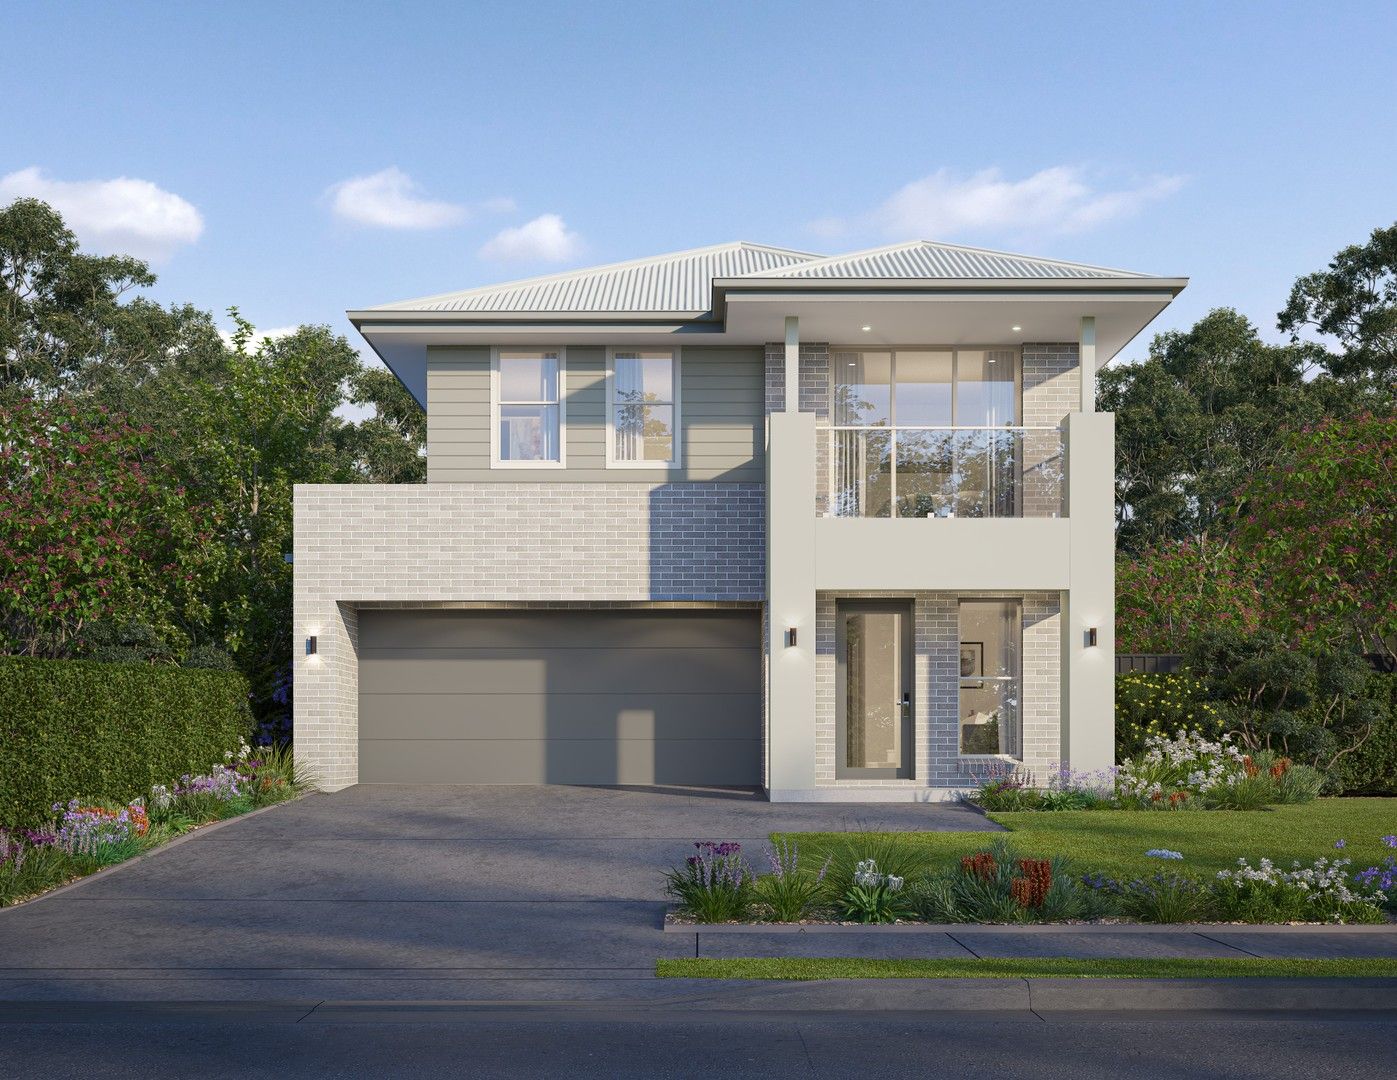 5 bedrooms New House & Land in Lot 3859 Proposed Rd MARSDEN PARK NSW, 2765